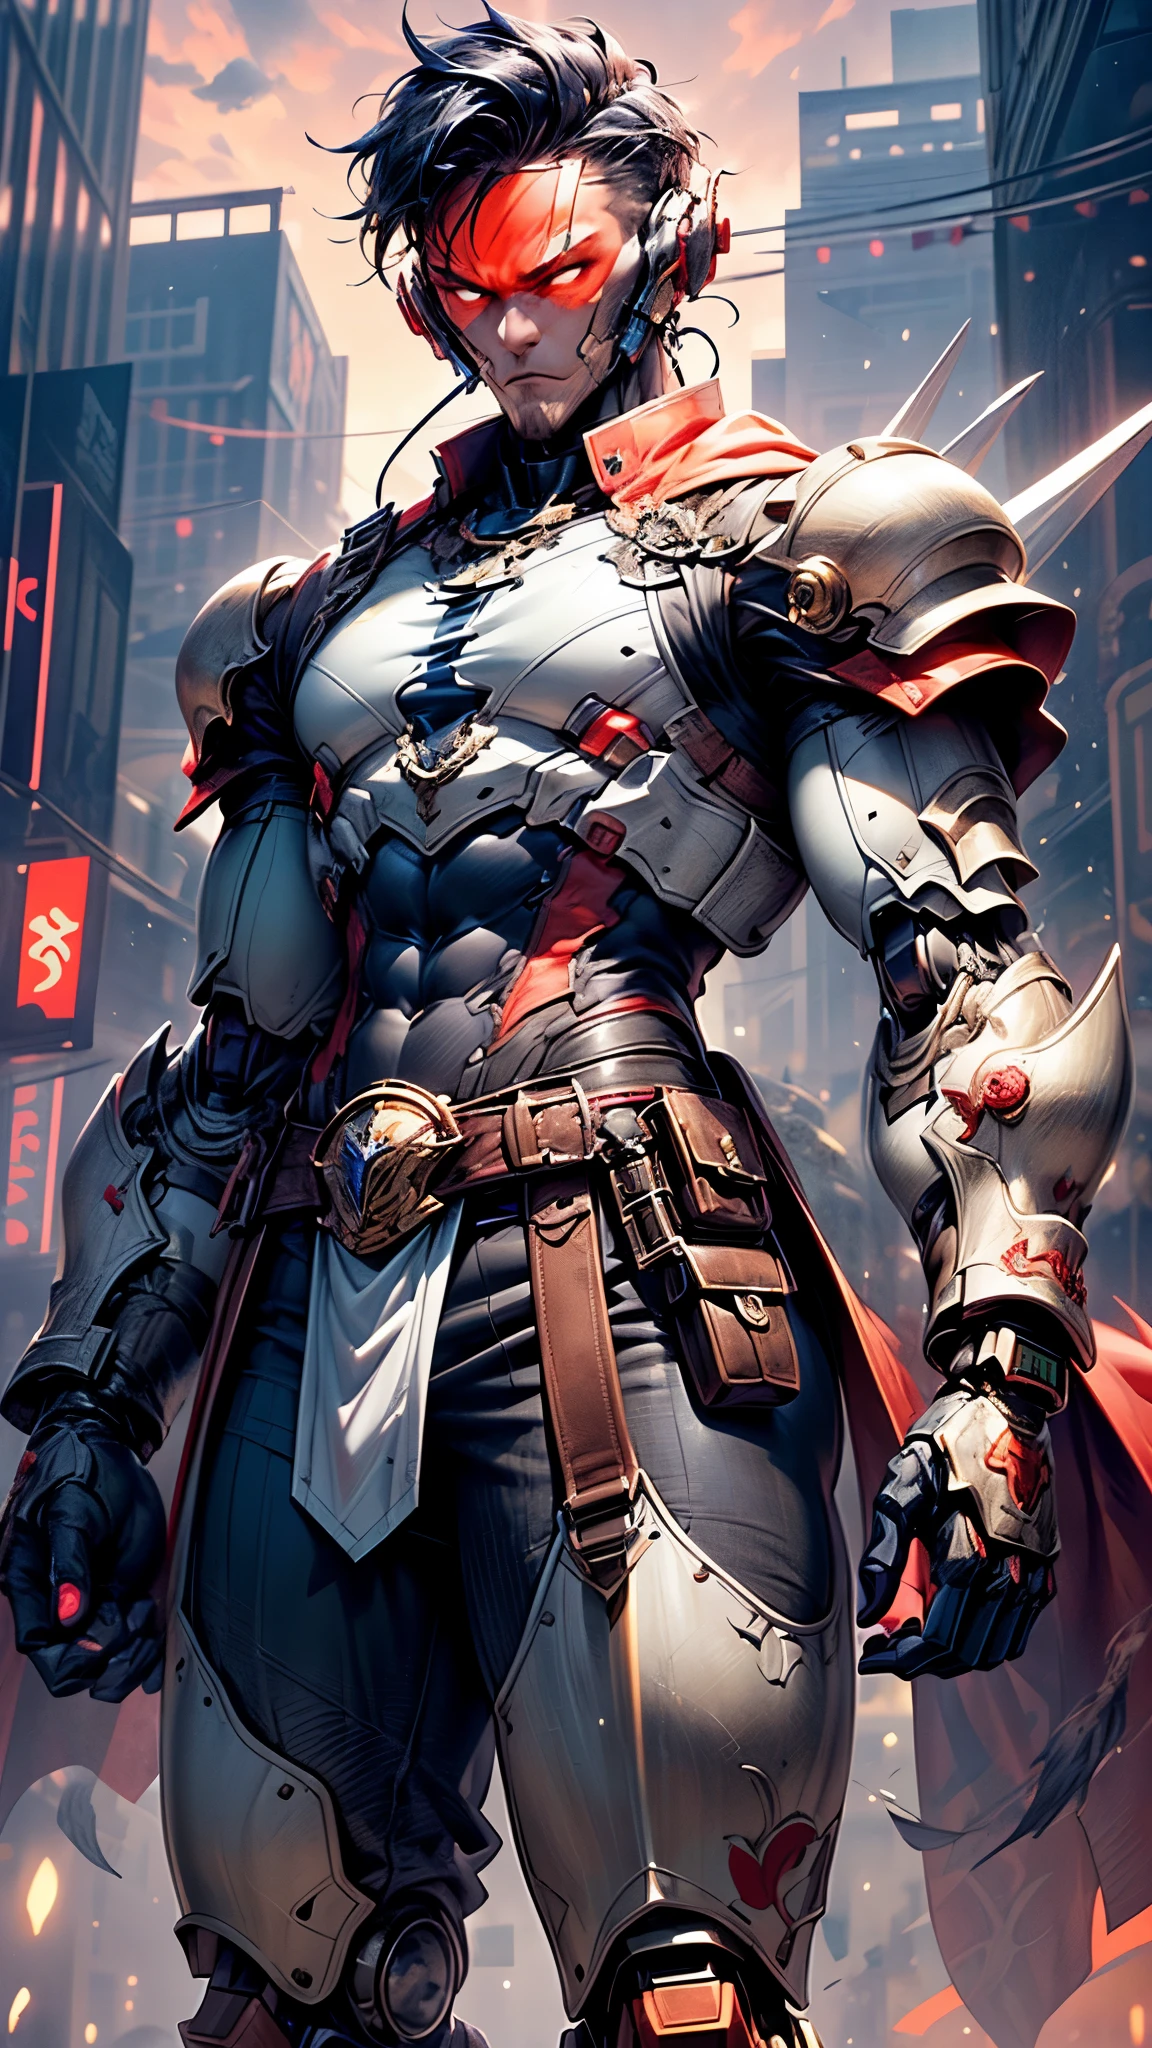 (((An epic and visually stunning digital anime masterpiece featuring a sylphlike masculine ((male:1.5)) decorated military soldier clad in a sleek yet tactical armored yet decorated leather military trench coat:1.2))), (((flat masculine male chest:1.5, mechanical mecha knight head with a narrow visor:1.5))), (((the character  adorned in a (scifi tactical armored open front trench coat with a built in exoskeleton, hood pulled up) (over a form fitted armor plated yet super sleek and revealing under suit with waist cut outs), the armor plating on the upper arms and shoulders beautifully engraved))):1.4. The image showcases the intricacies of the character’s armor and clothing:1.5, ((capturing their flamboyant essence and heavy mecha aesthetic:1.2)). The character also possesses an androgynous charm, (((with slim yet heavily muscled physique:1.2, sylphlike with a sleek waist, toned yet beautifully sleek cybernetic arms:1.3, mechanical arms and legs:1.3, mecha muscles:1.3))), looking at viewer, (((brass metal armor and brown leather, dieselpunk:1.3)))